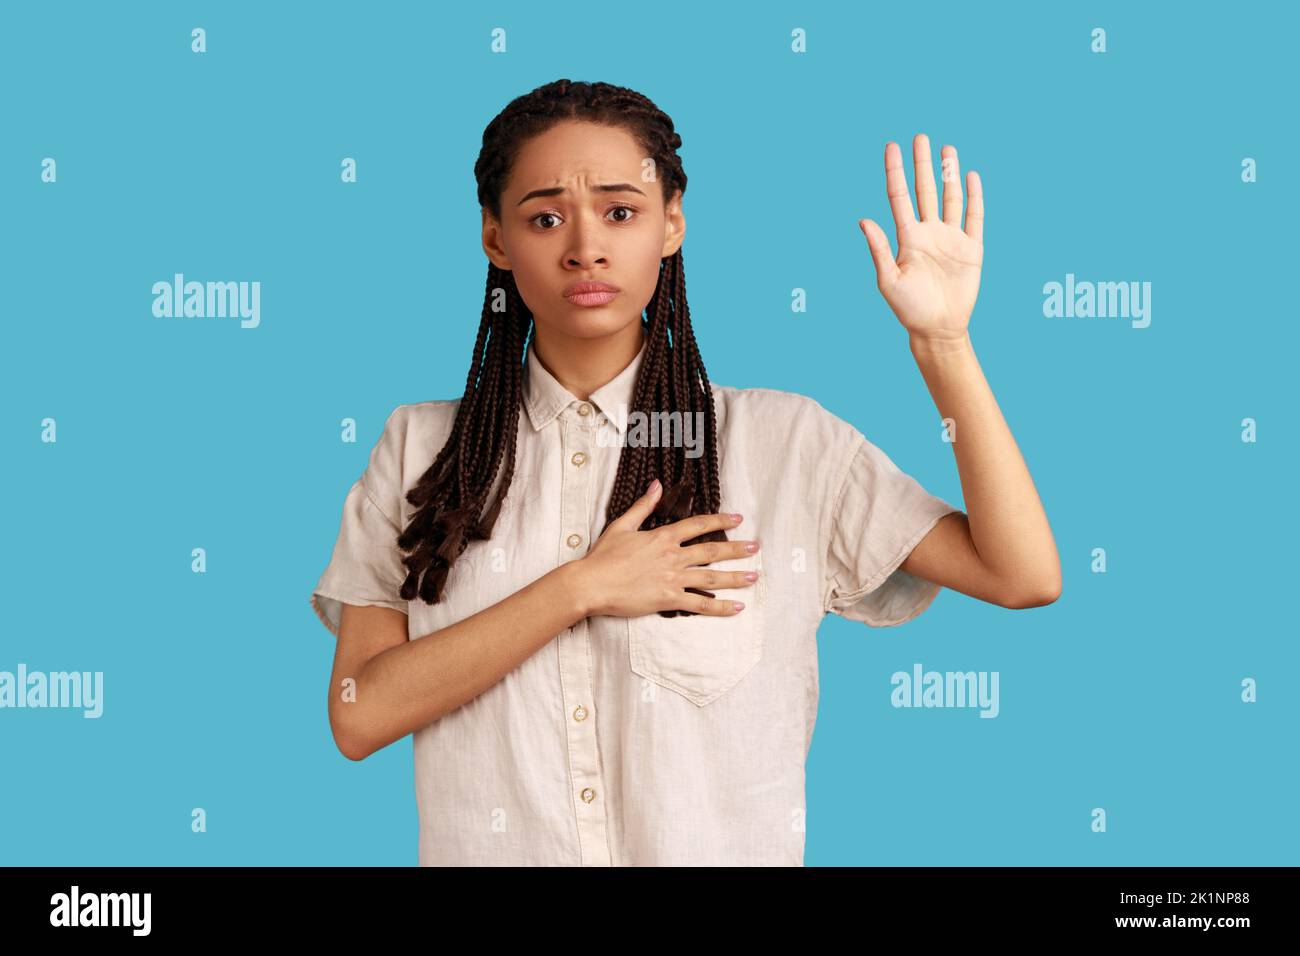 I promise. Portrait of woman with dreadlocks making swearing gesture and holding arm on chest, taking oath, pledging allegiance, wearing white shirt. Indoor studio shot isolated on blue background. Stock Photo